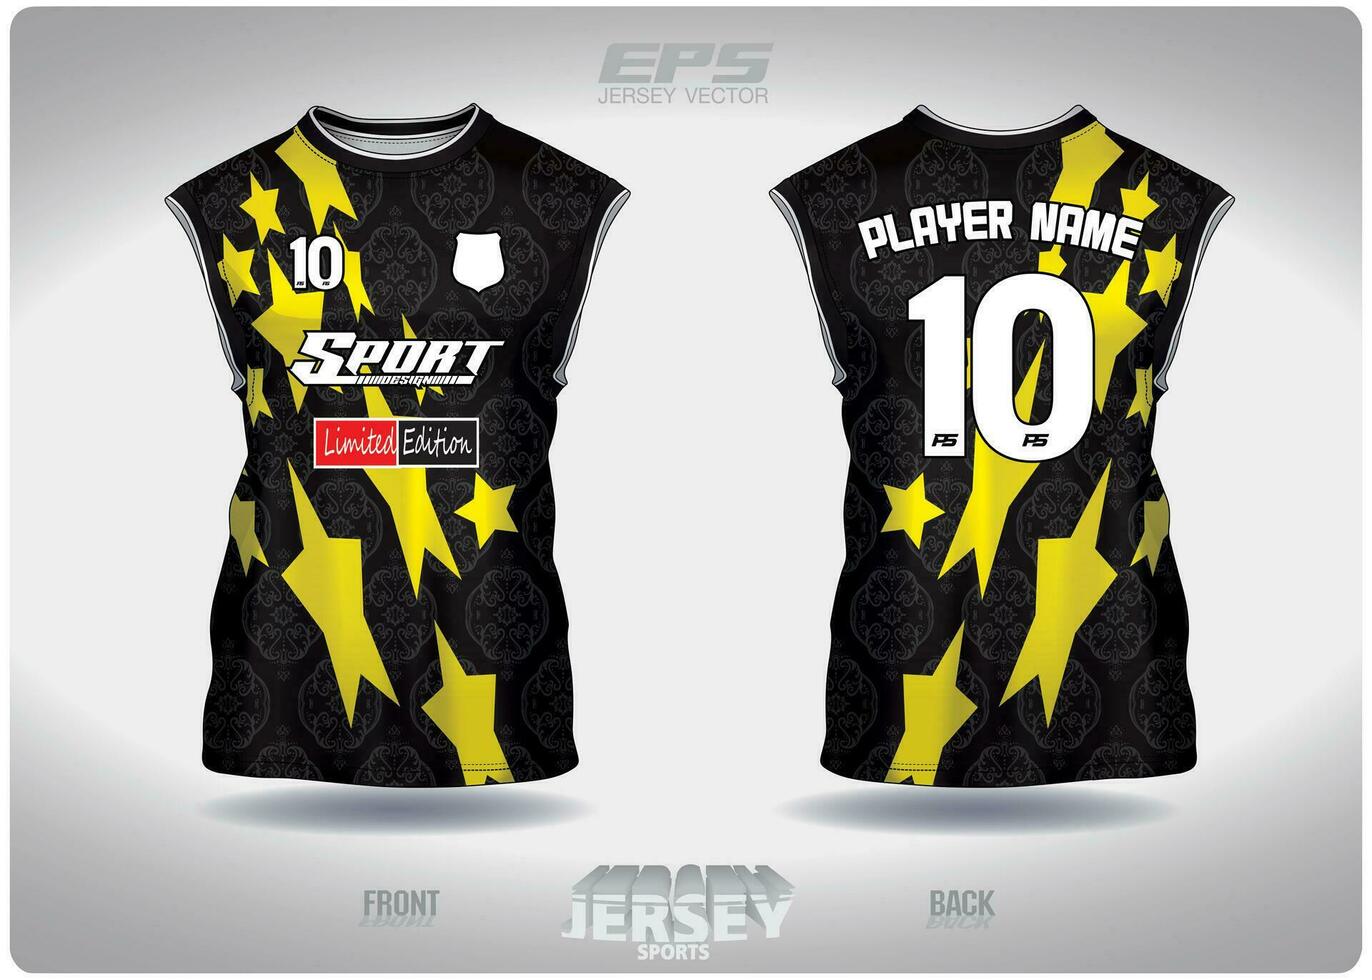 EPS jersey sports shirt vector.yellow stars on fabric pattern design, illustration, textile background for sleeveless shirt sports t-shirt, football jersey sleeveless shirt vector